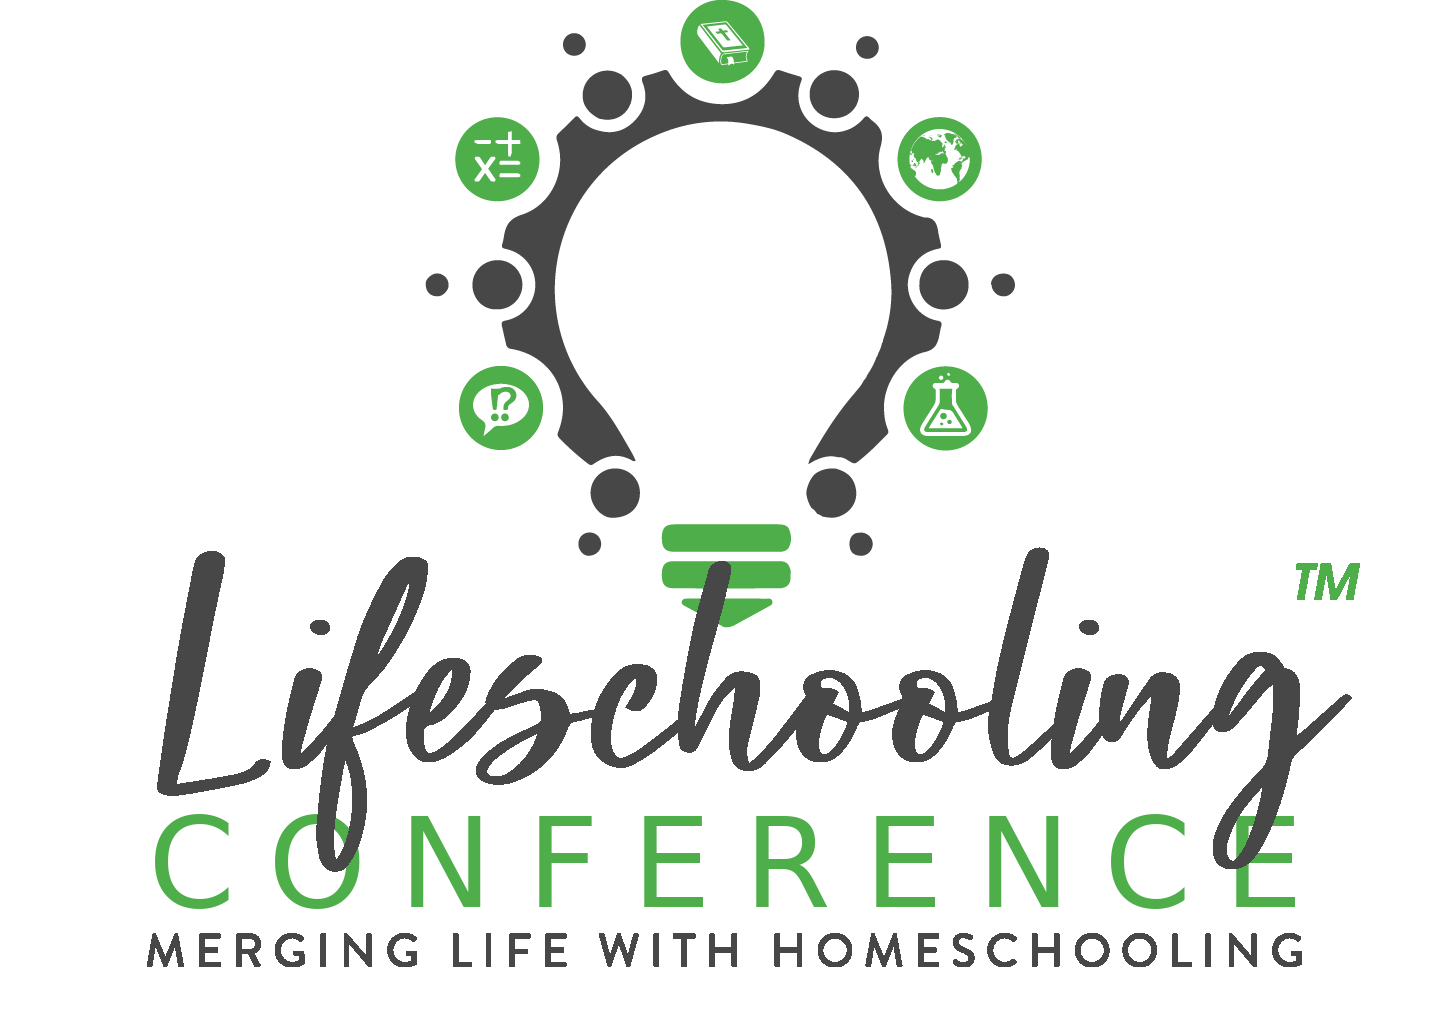 Lifeschooling Conference